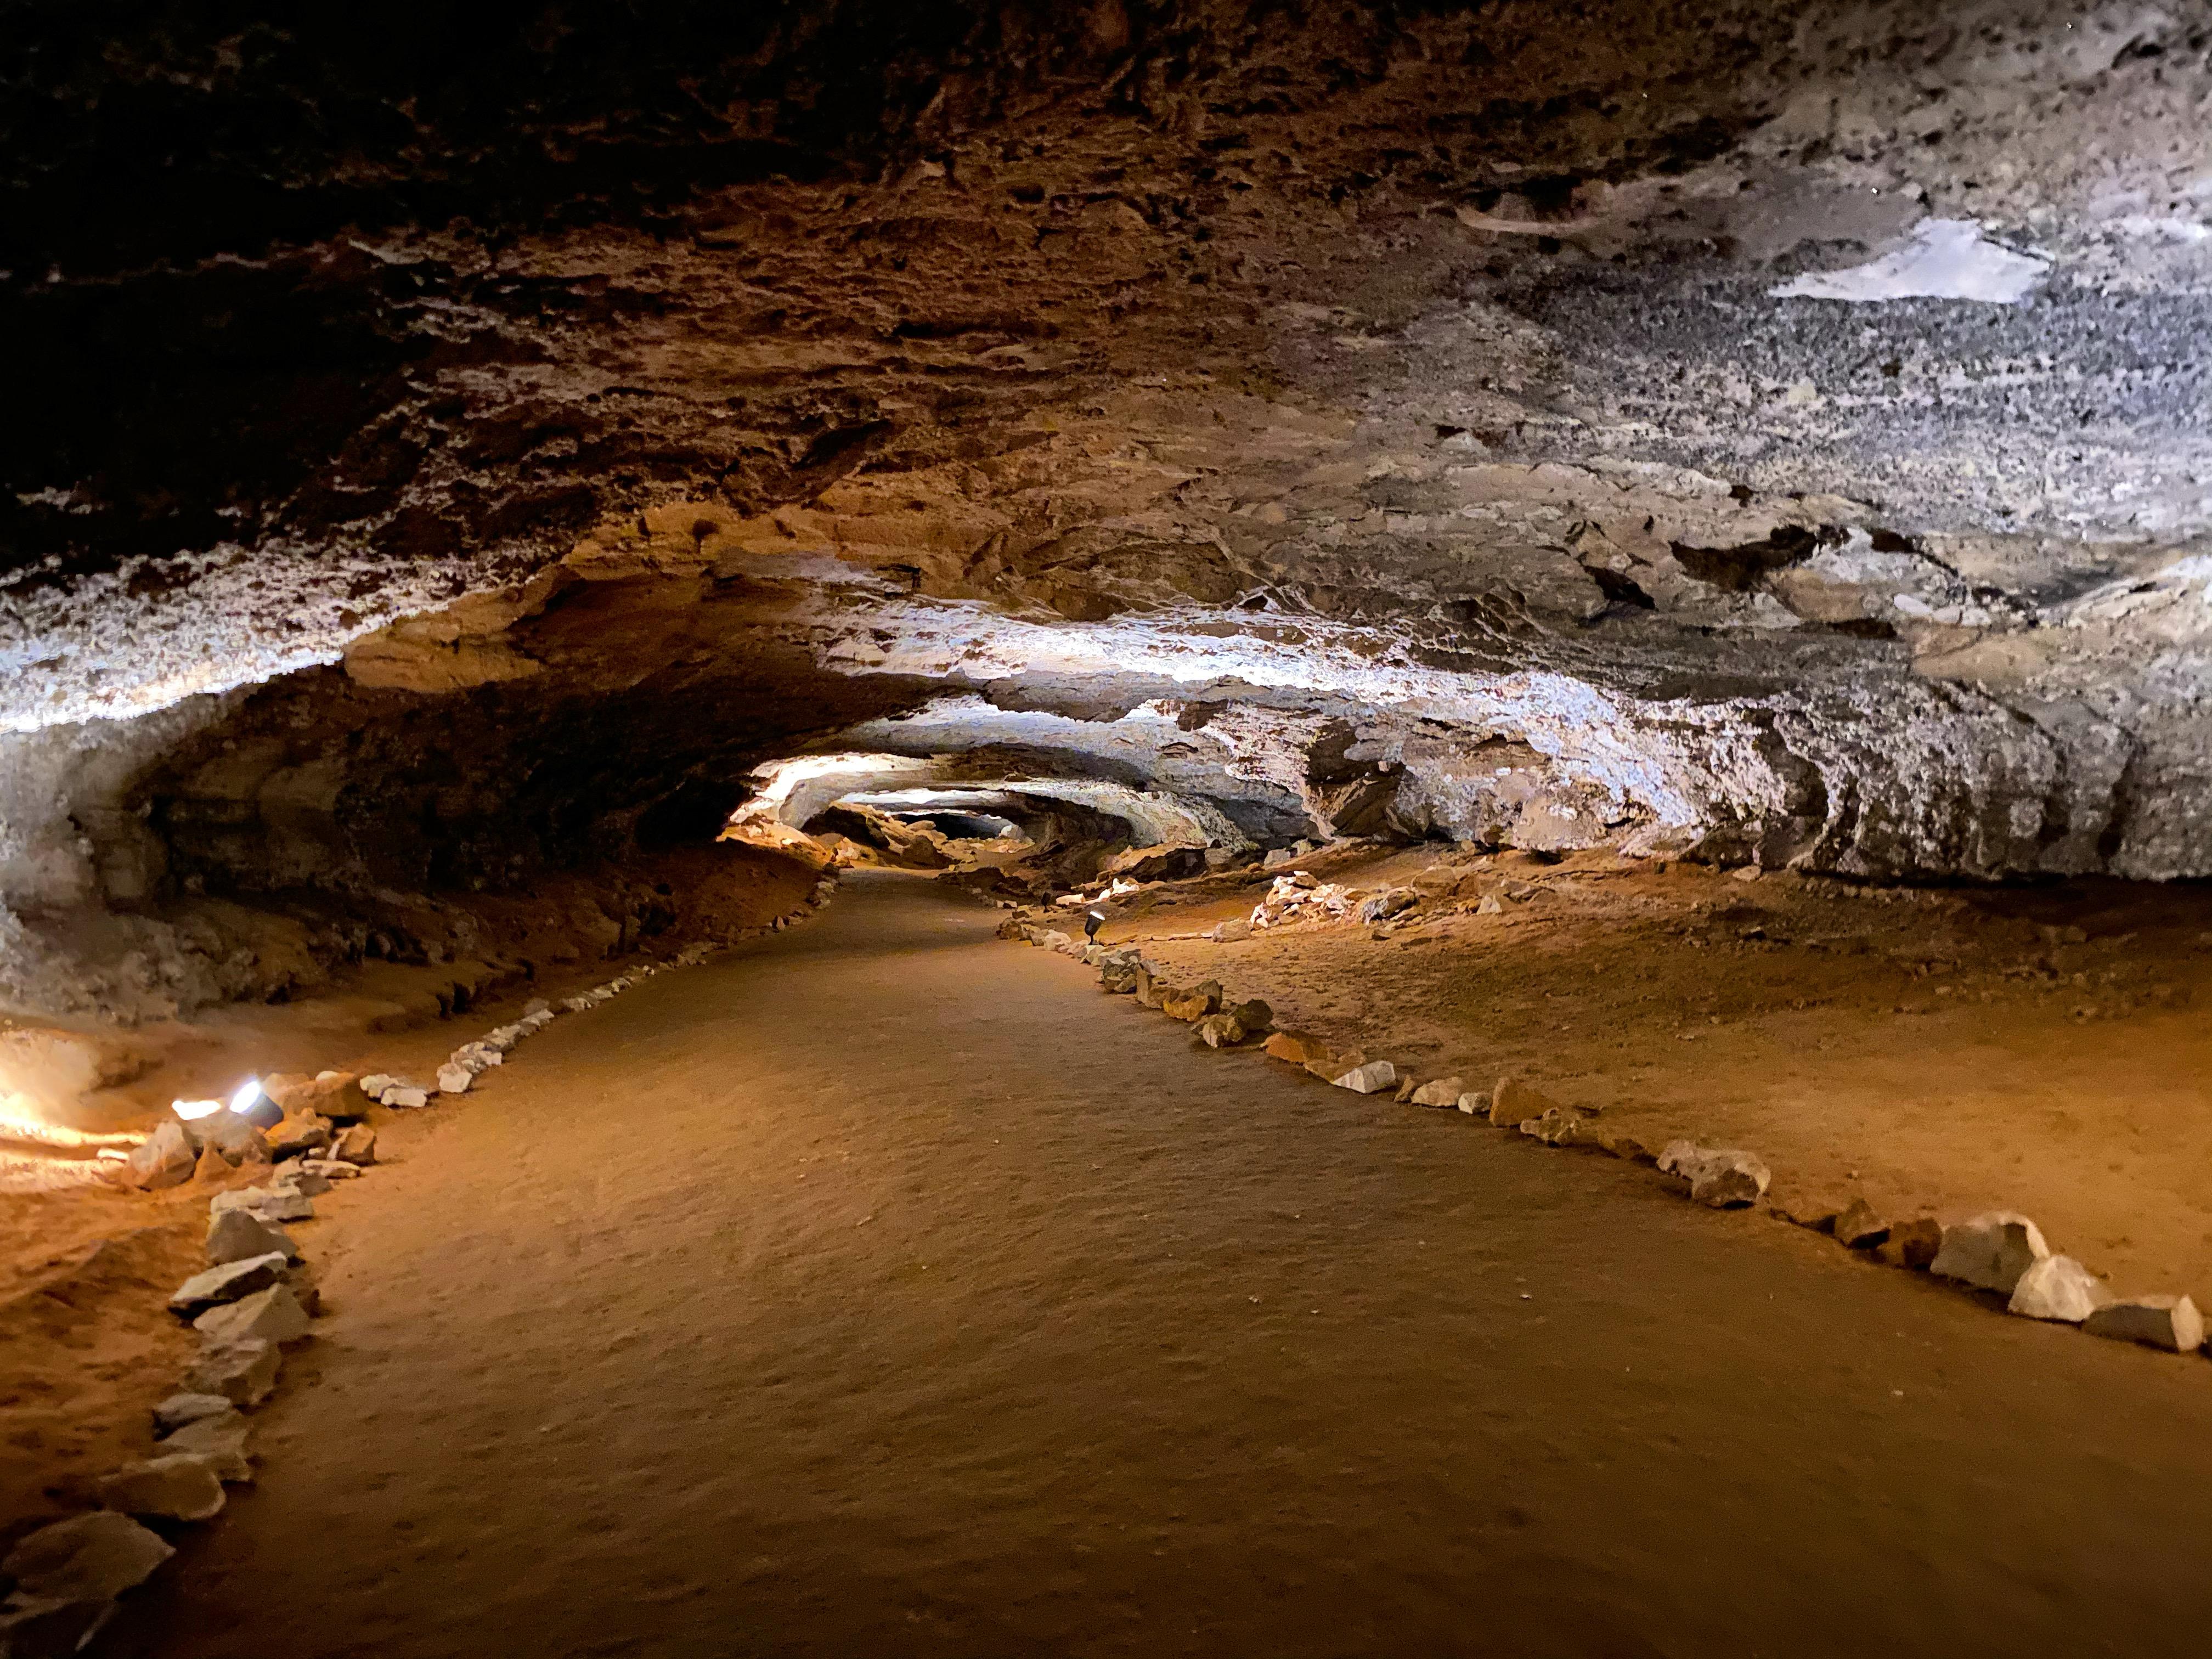 A long cave passage with an oval shape.